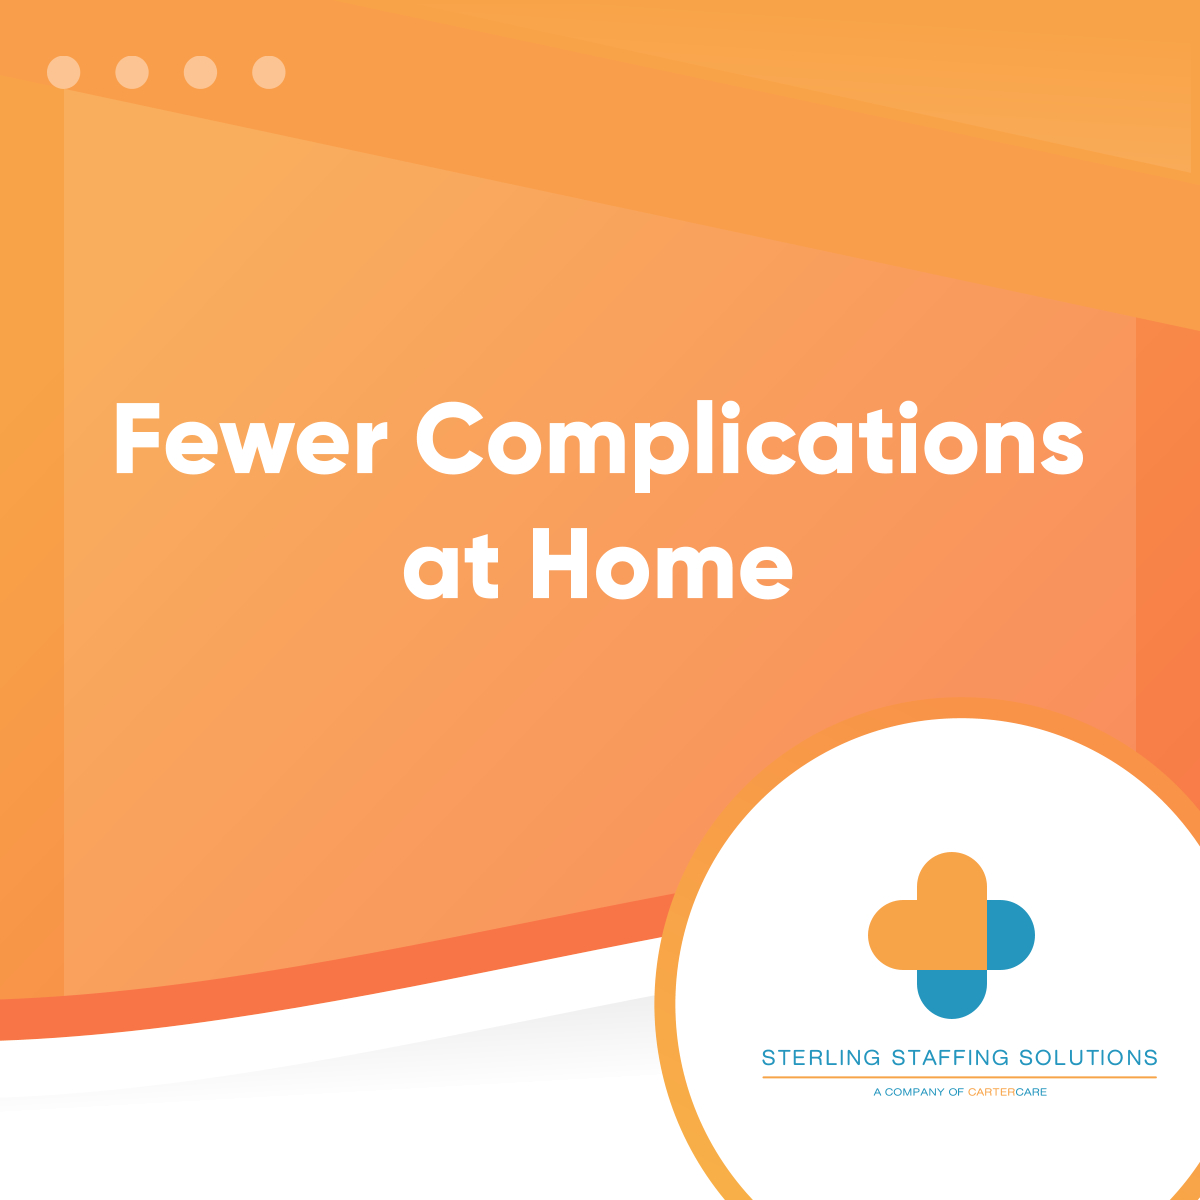 Patients who choose to stay at home get more than just convenience. As they are safely located in their own residence, they are less exposed to infections. A dedicated home care provider can attend to their needs and improve patient outcomes.
 
#HomeCareProvider #HealthcareCareer